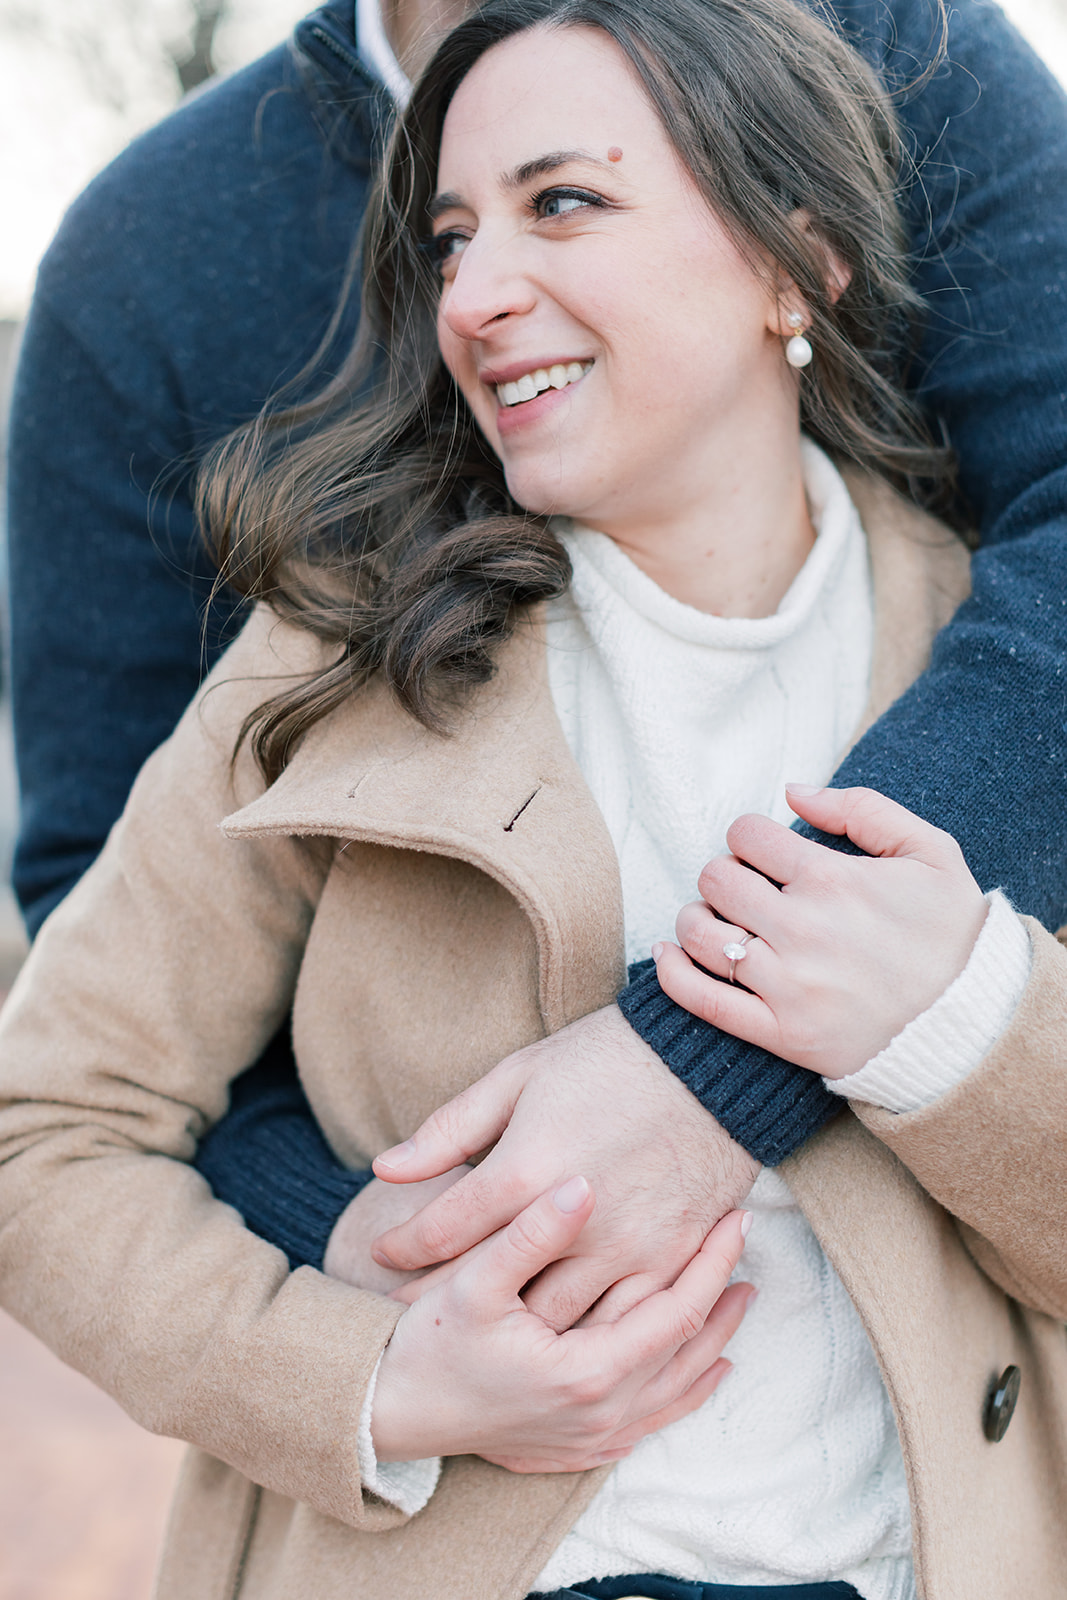 An engaged couple in Washington DC during their winter engagement session